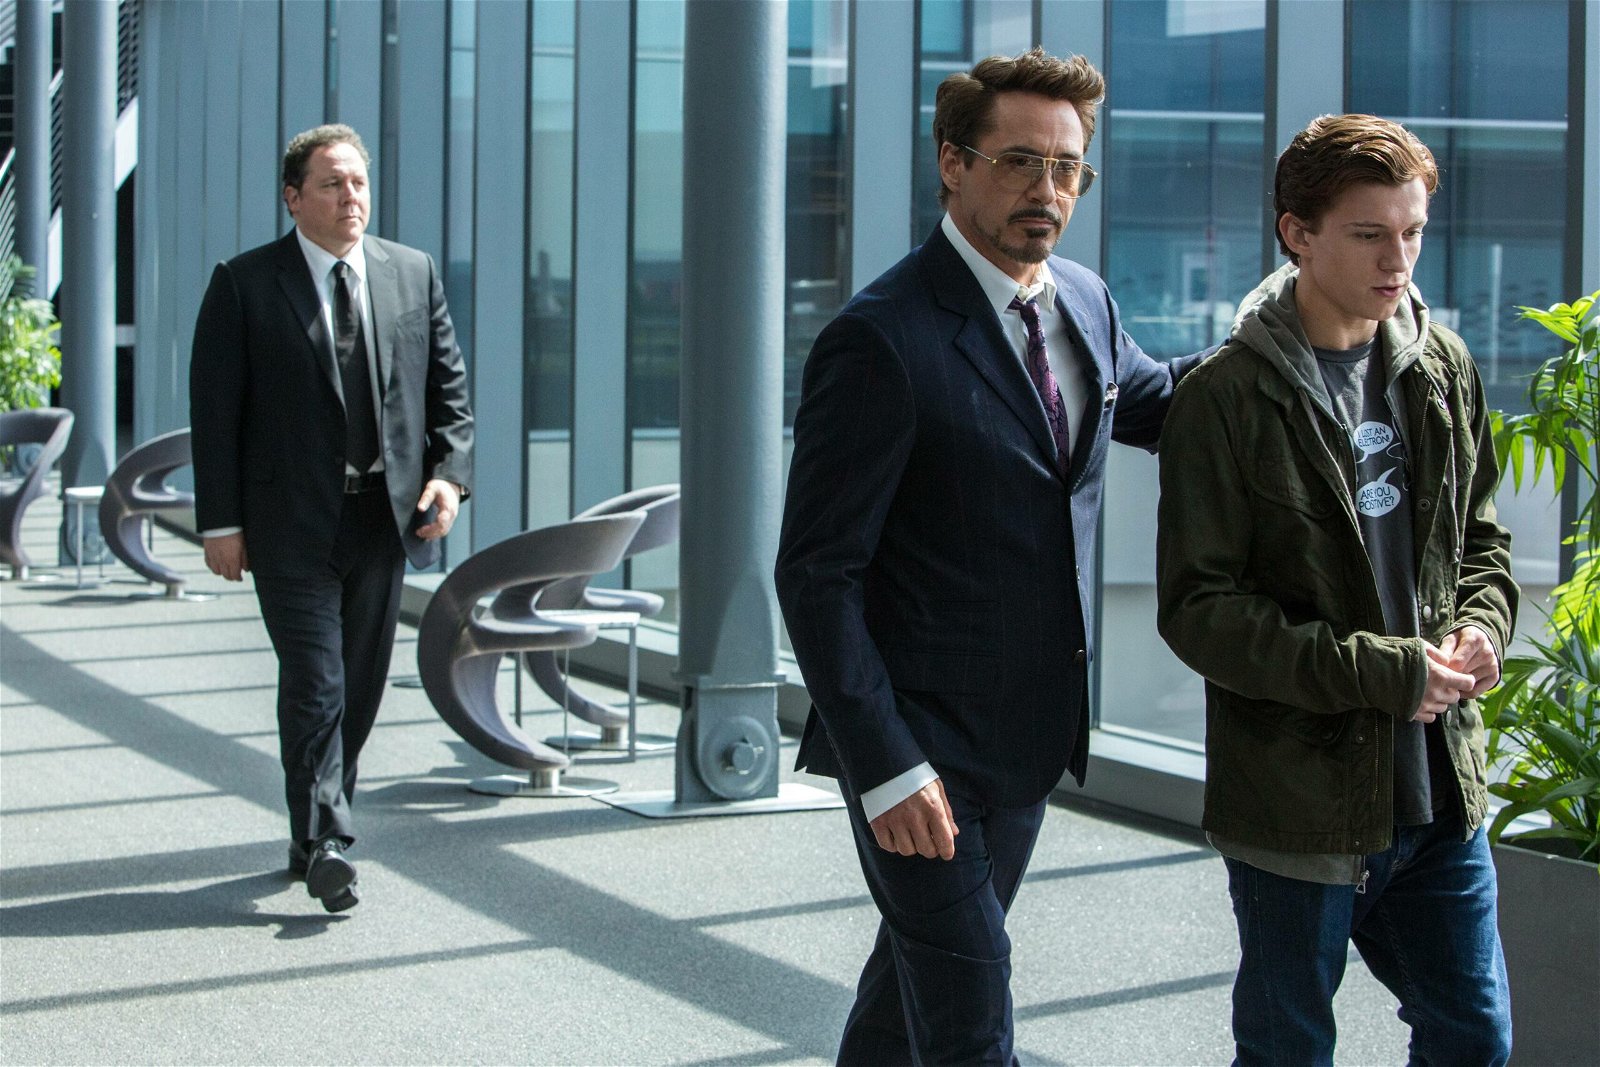 Robert Downey Jr. and Tom Holland in a still from Spiderman: Homecoming